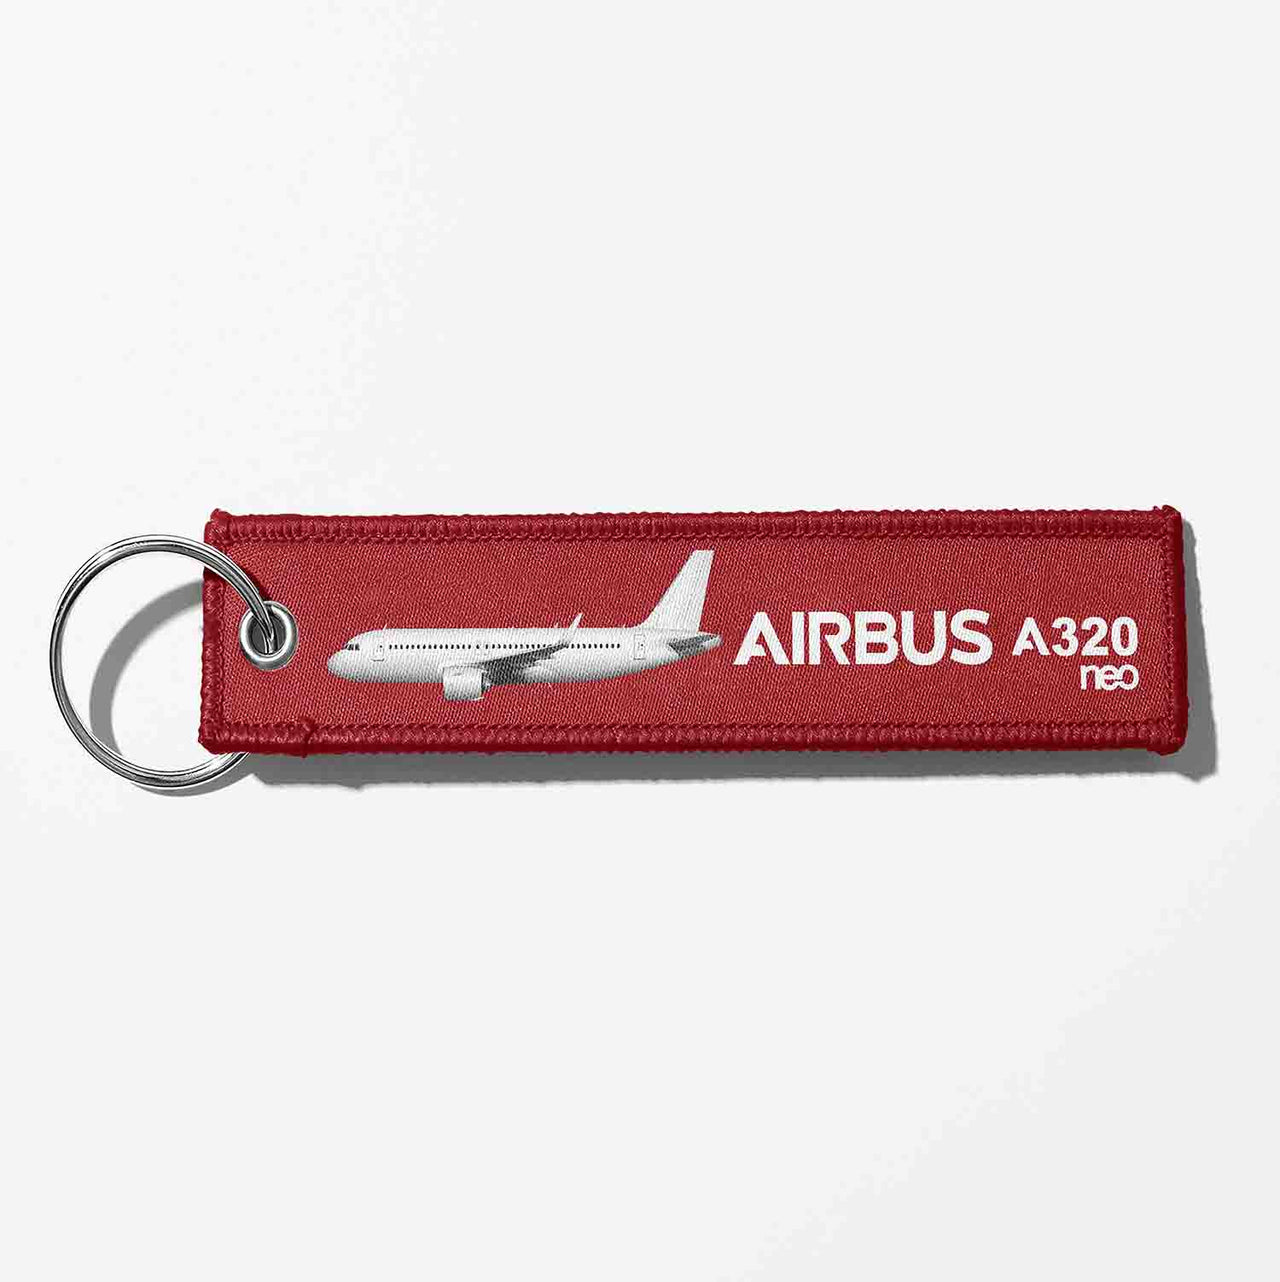 The Airbus A320neo Designed Key Chains